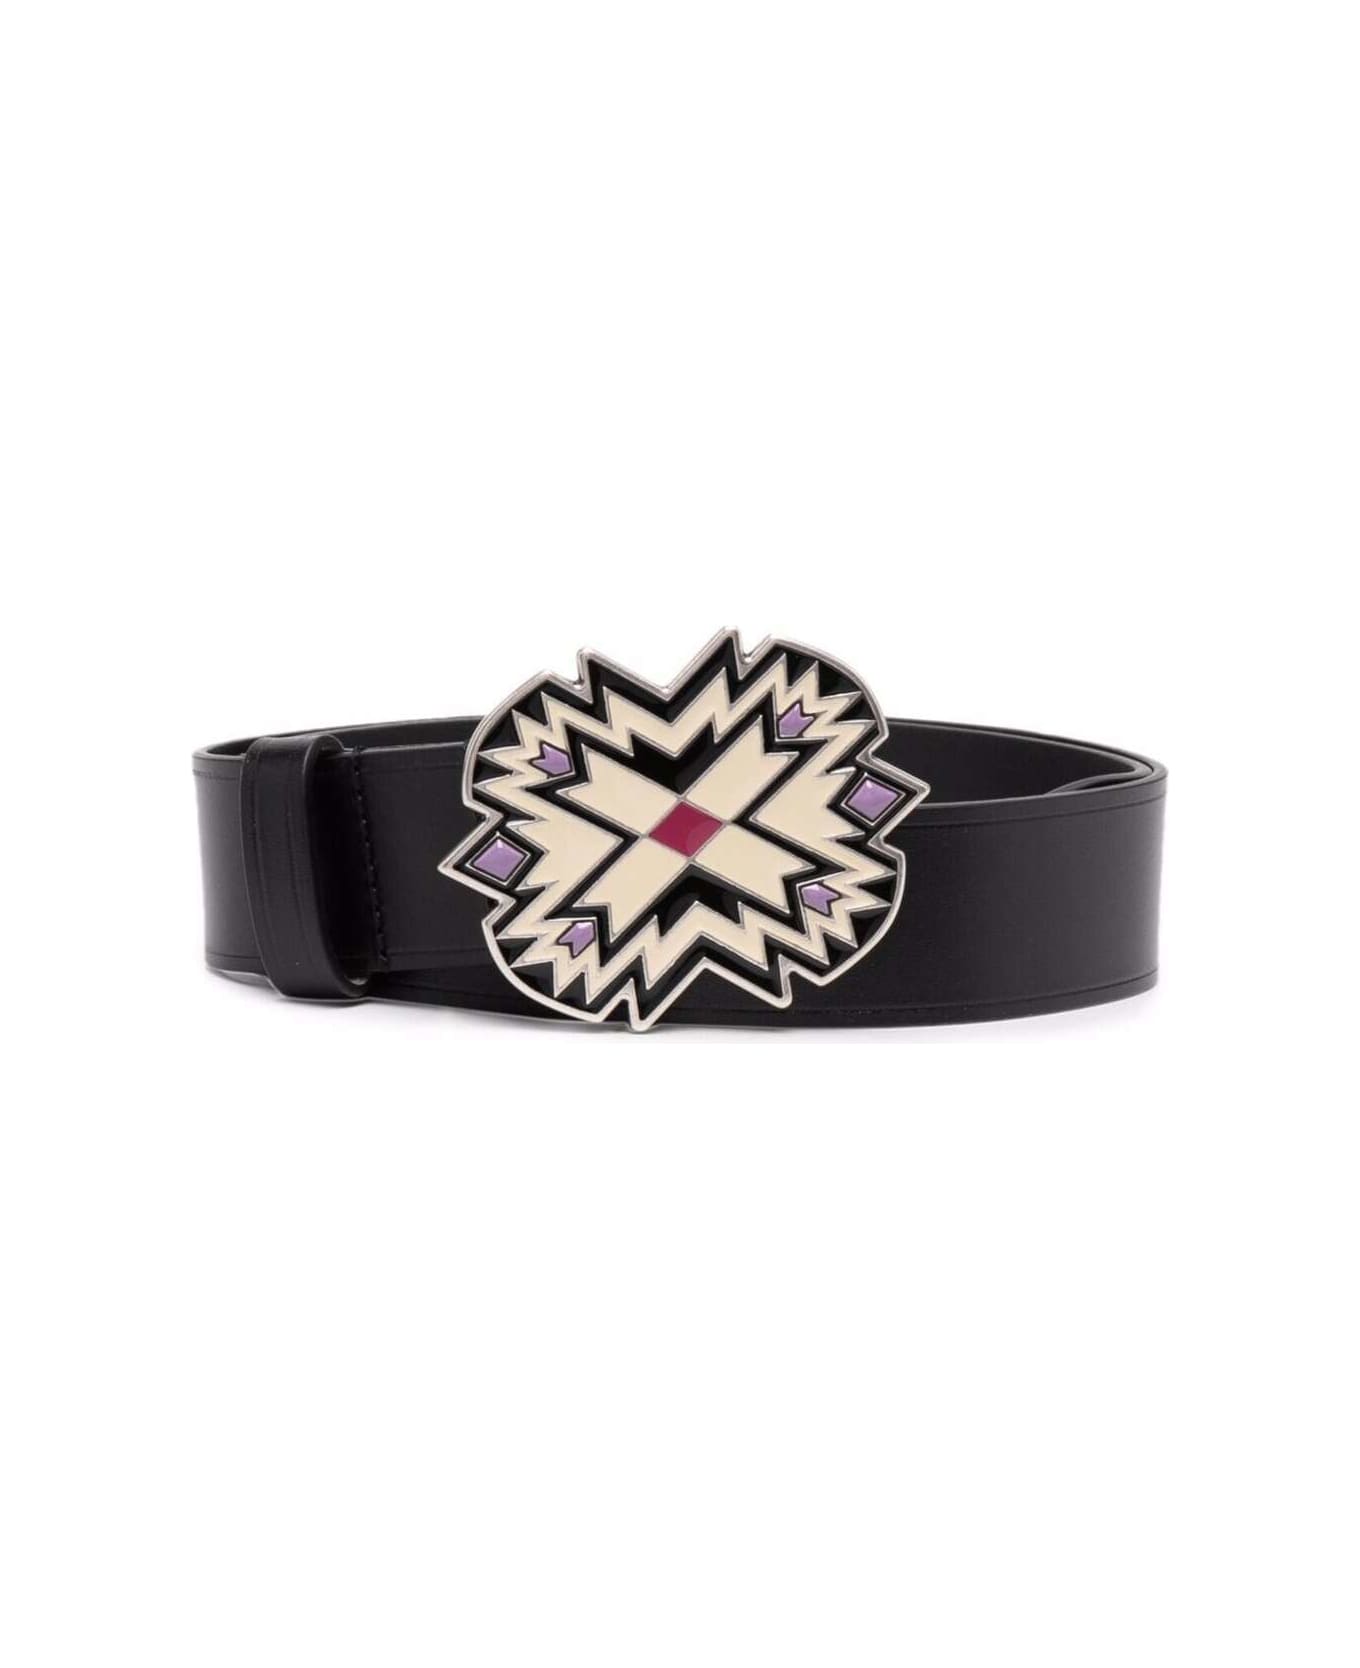 Isabel Marant Isablel Marant Woman's Black Leather Belt With Decorated Buckle - Black